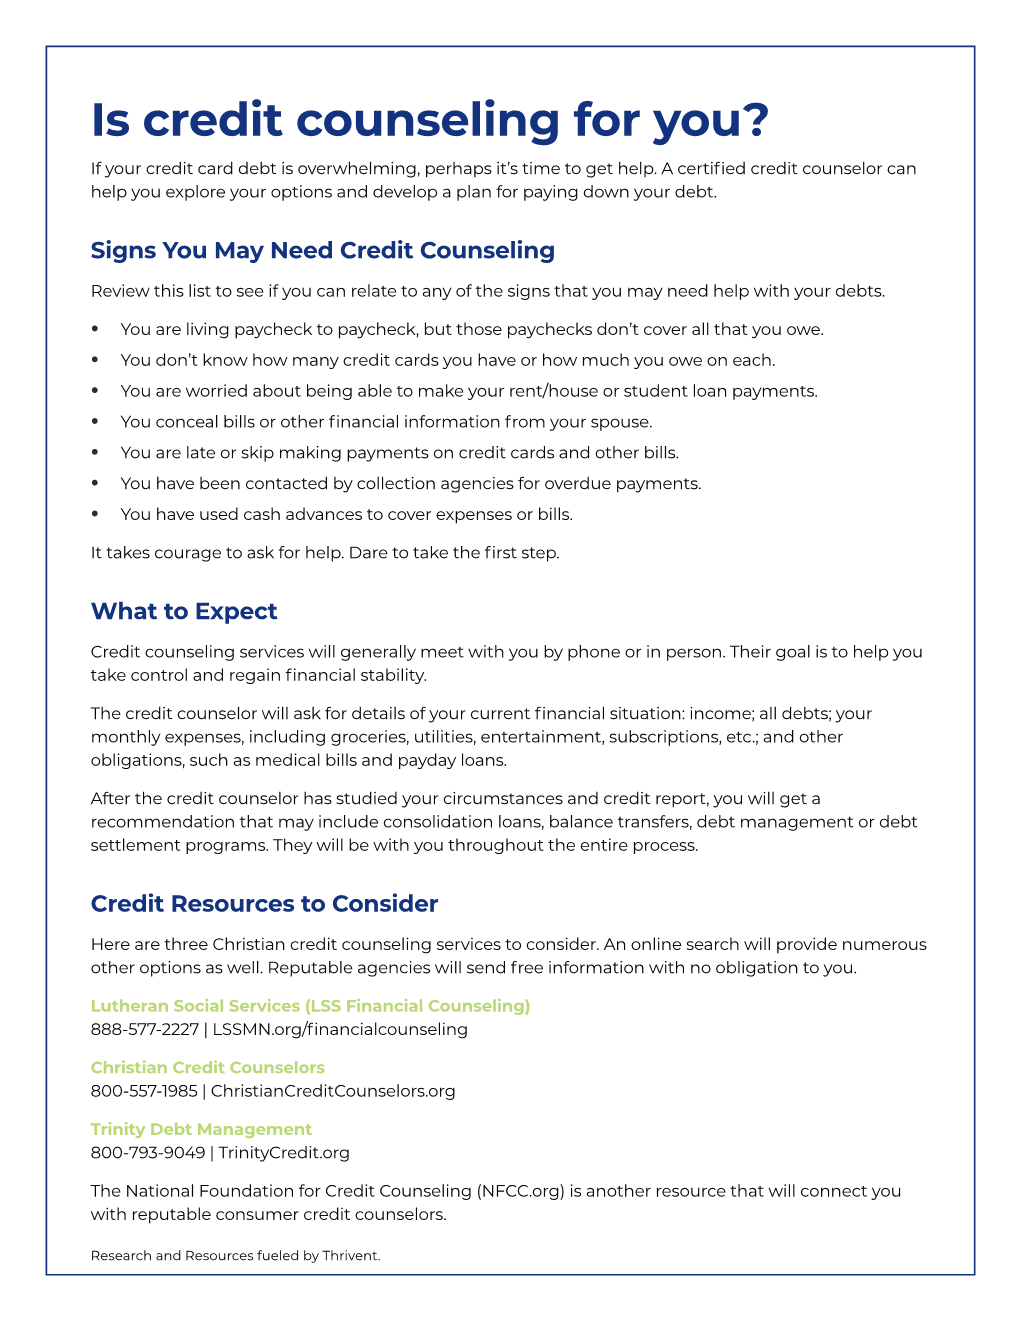 Is Credit Counseling for You? If Your Credit Card Debt Is Overwhelming, Perhaps It’S Time to Get Help